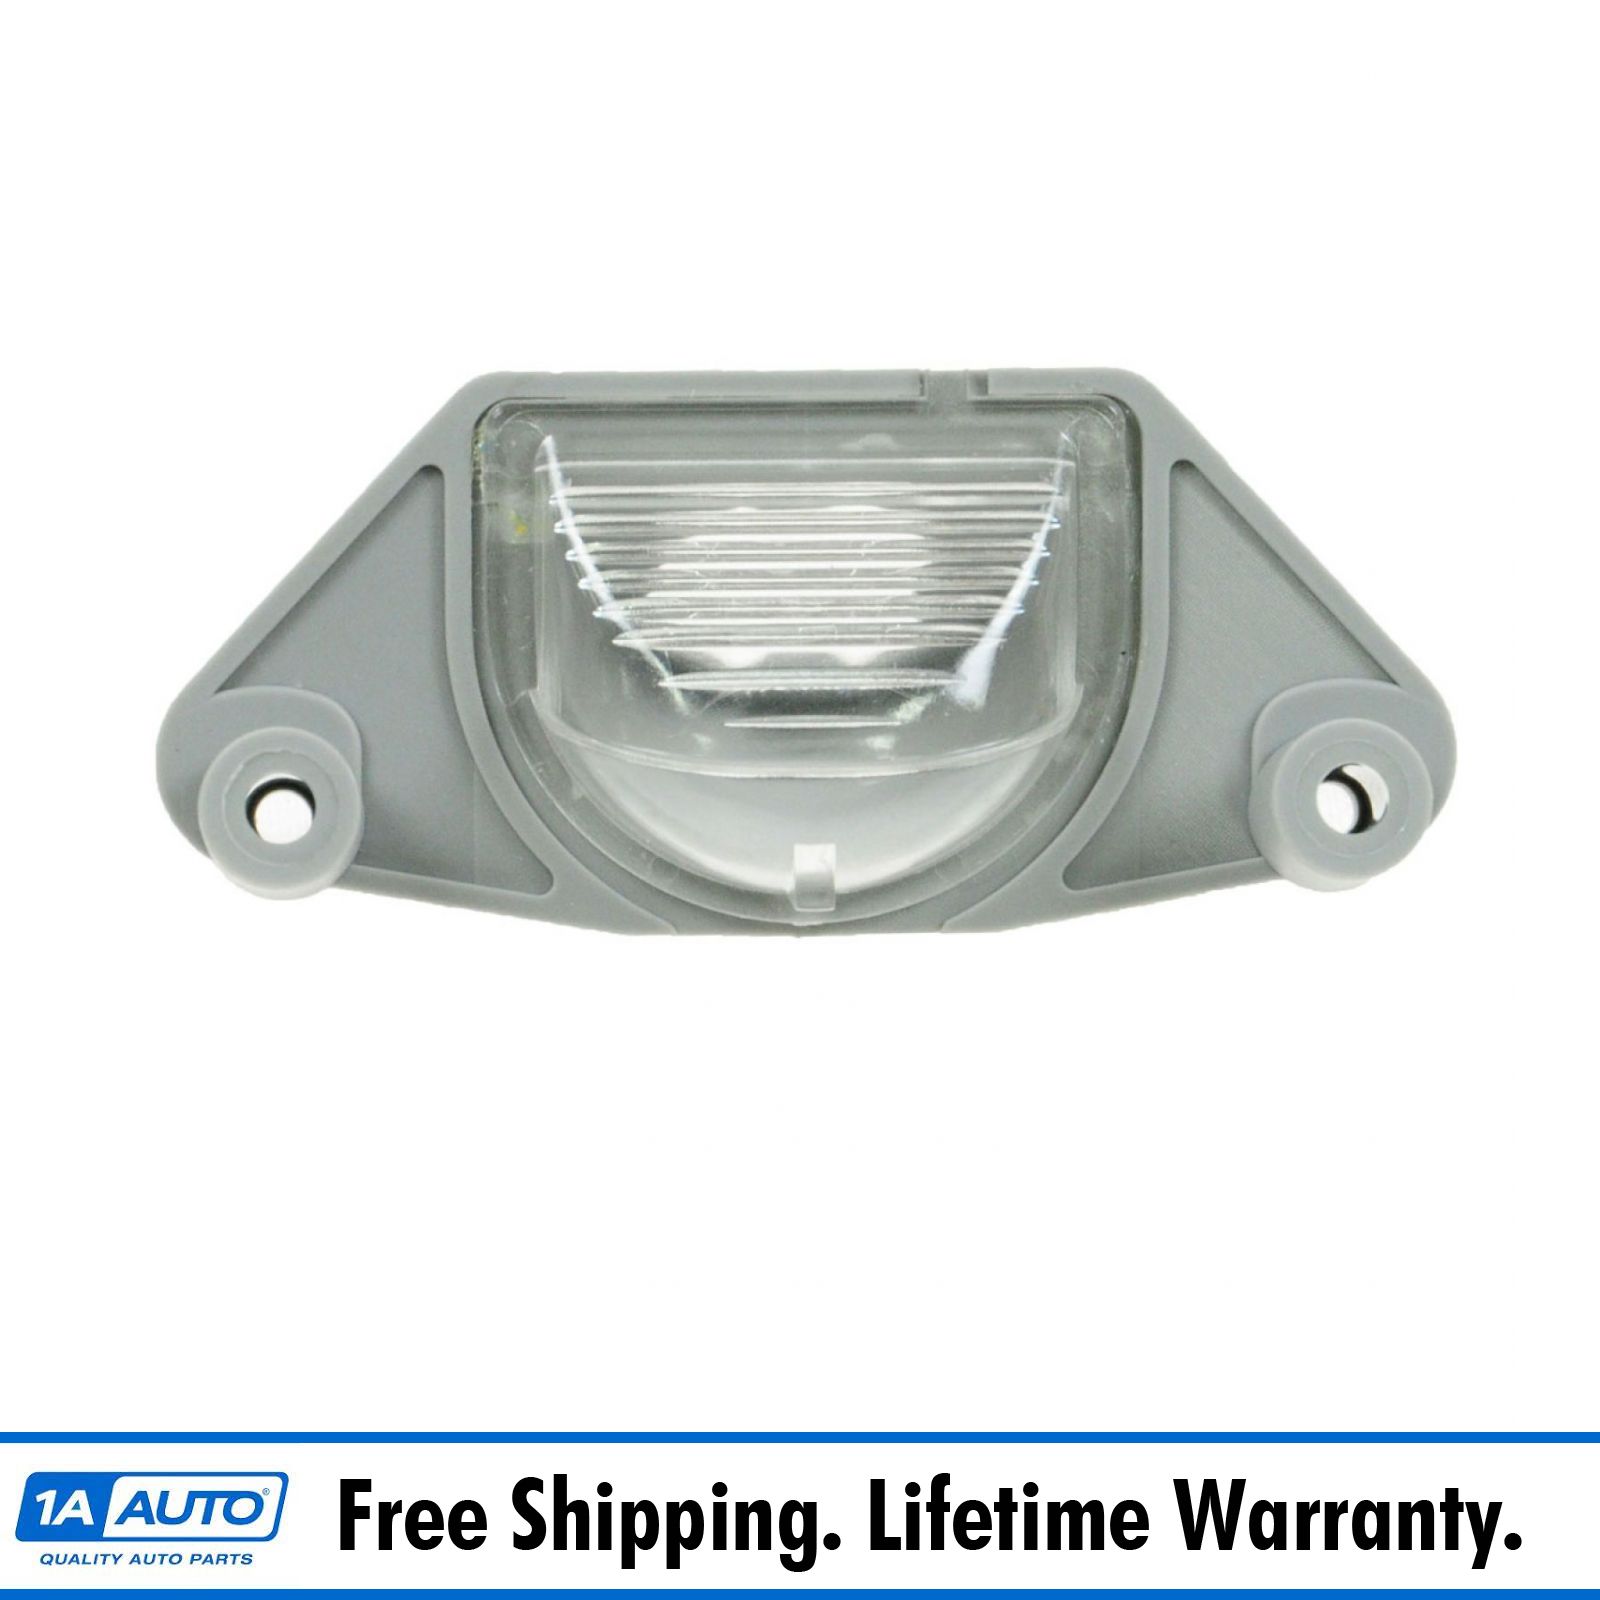 Dorman License Plate Light Lamp LH RH for Buick Chevy GMC Olds Pontiac Pickup | eBay 2003 Buick Lesabre License Plate Bulb Replacement